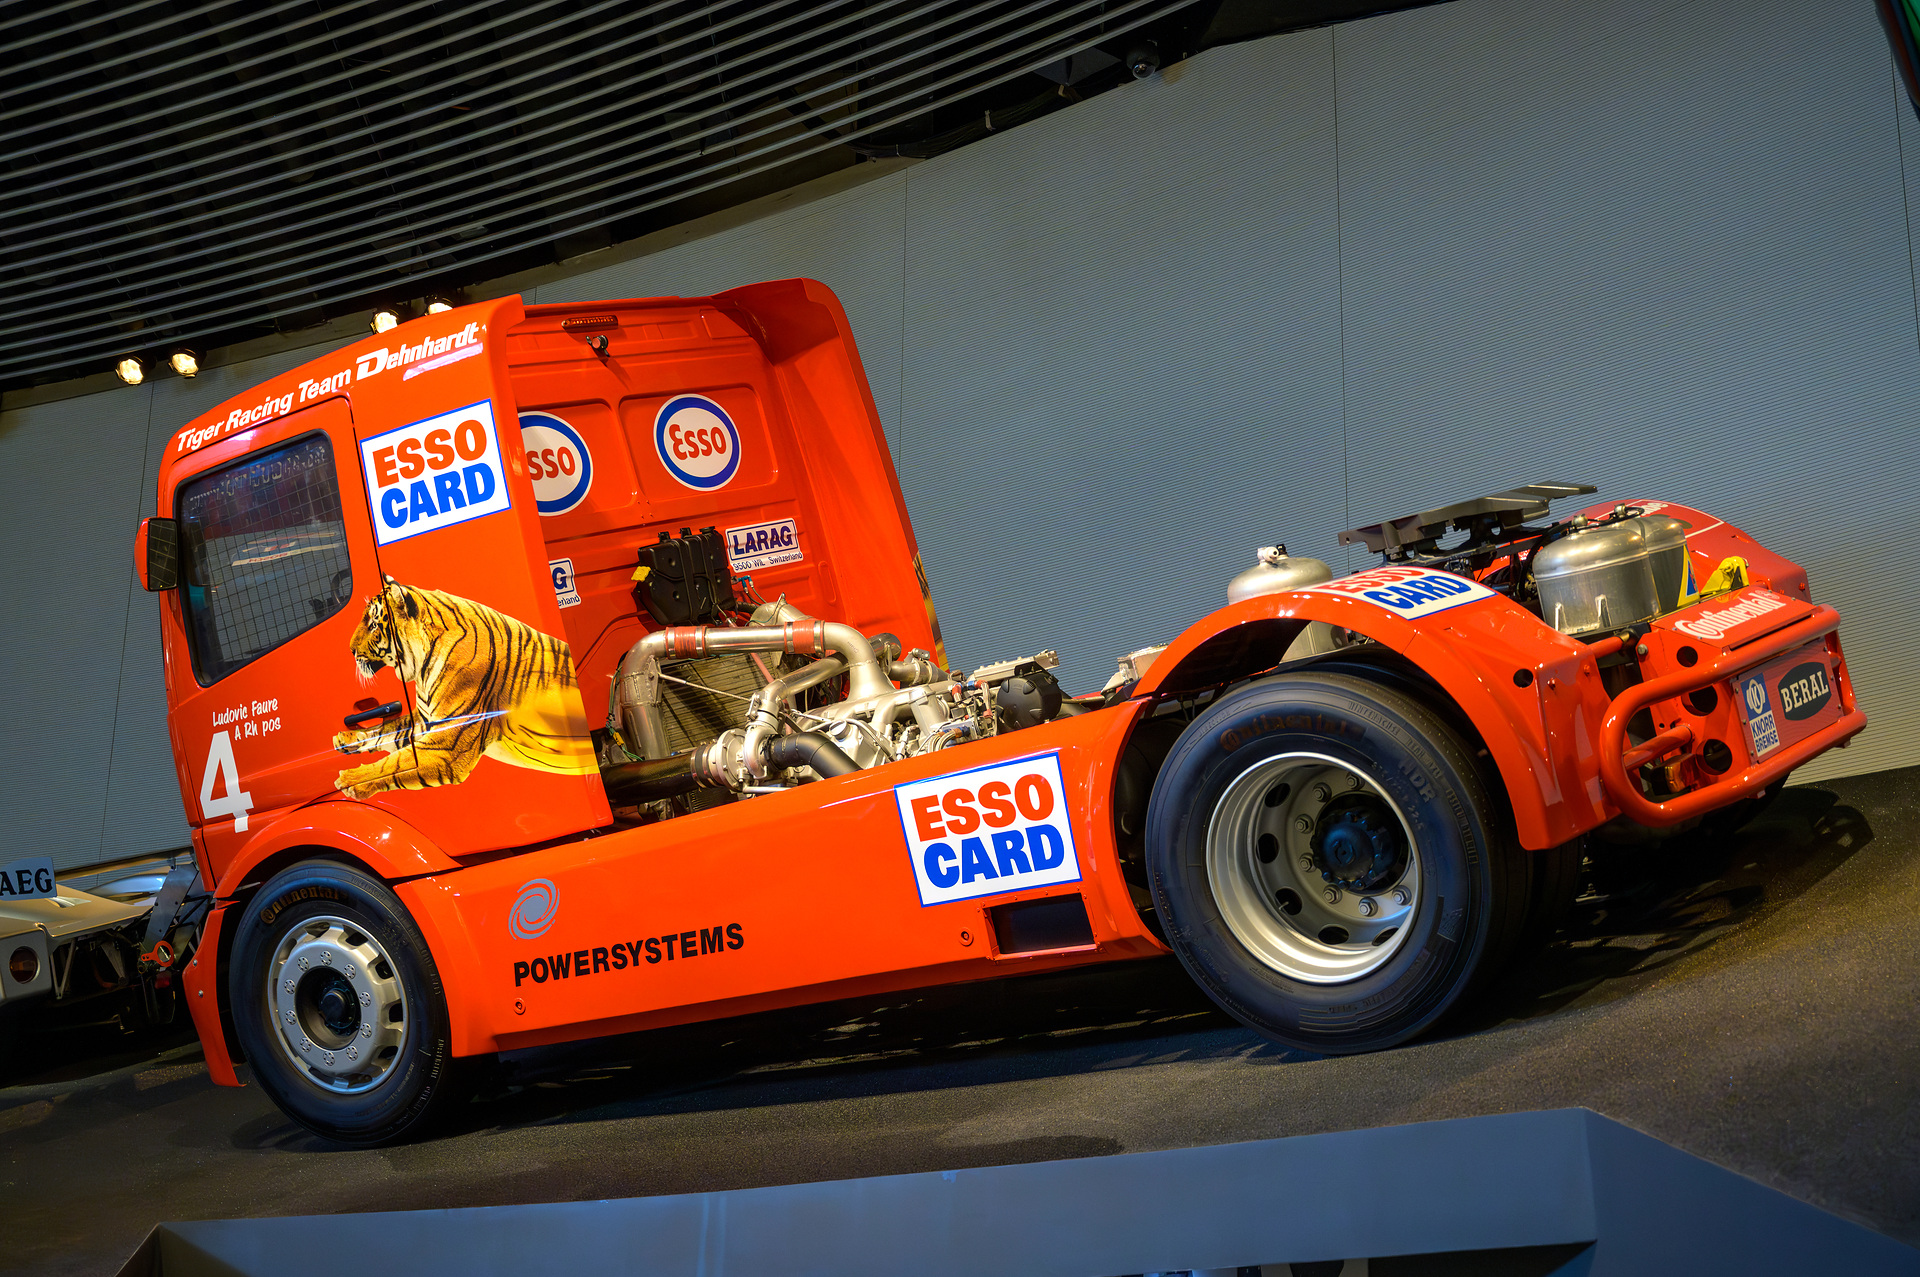 Five-tonne racing truck with 1,100 kW (1,496 hp) and 160 km/h